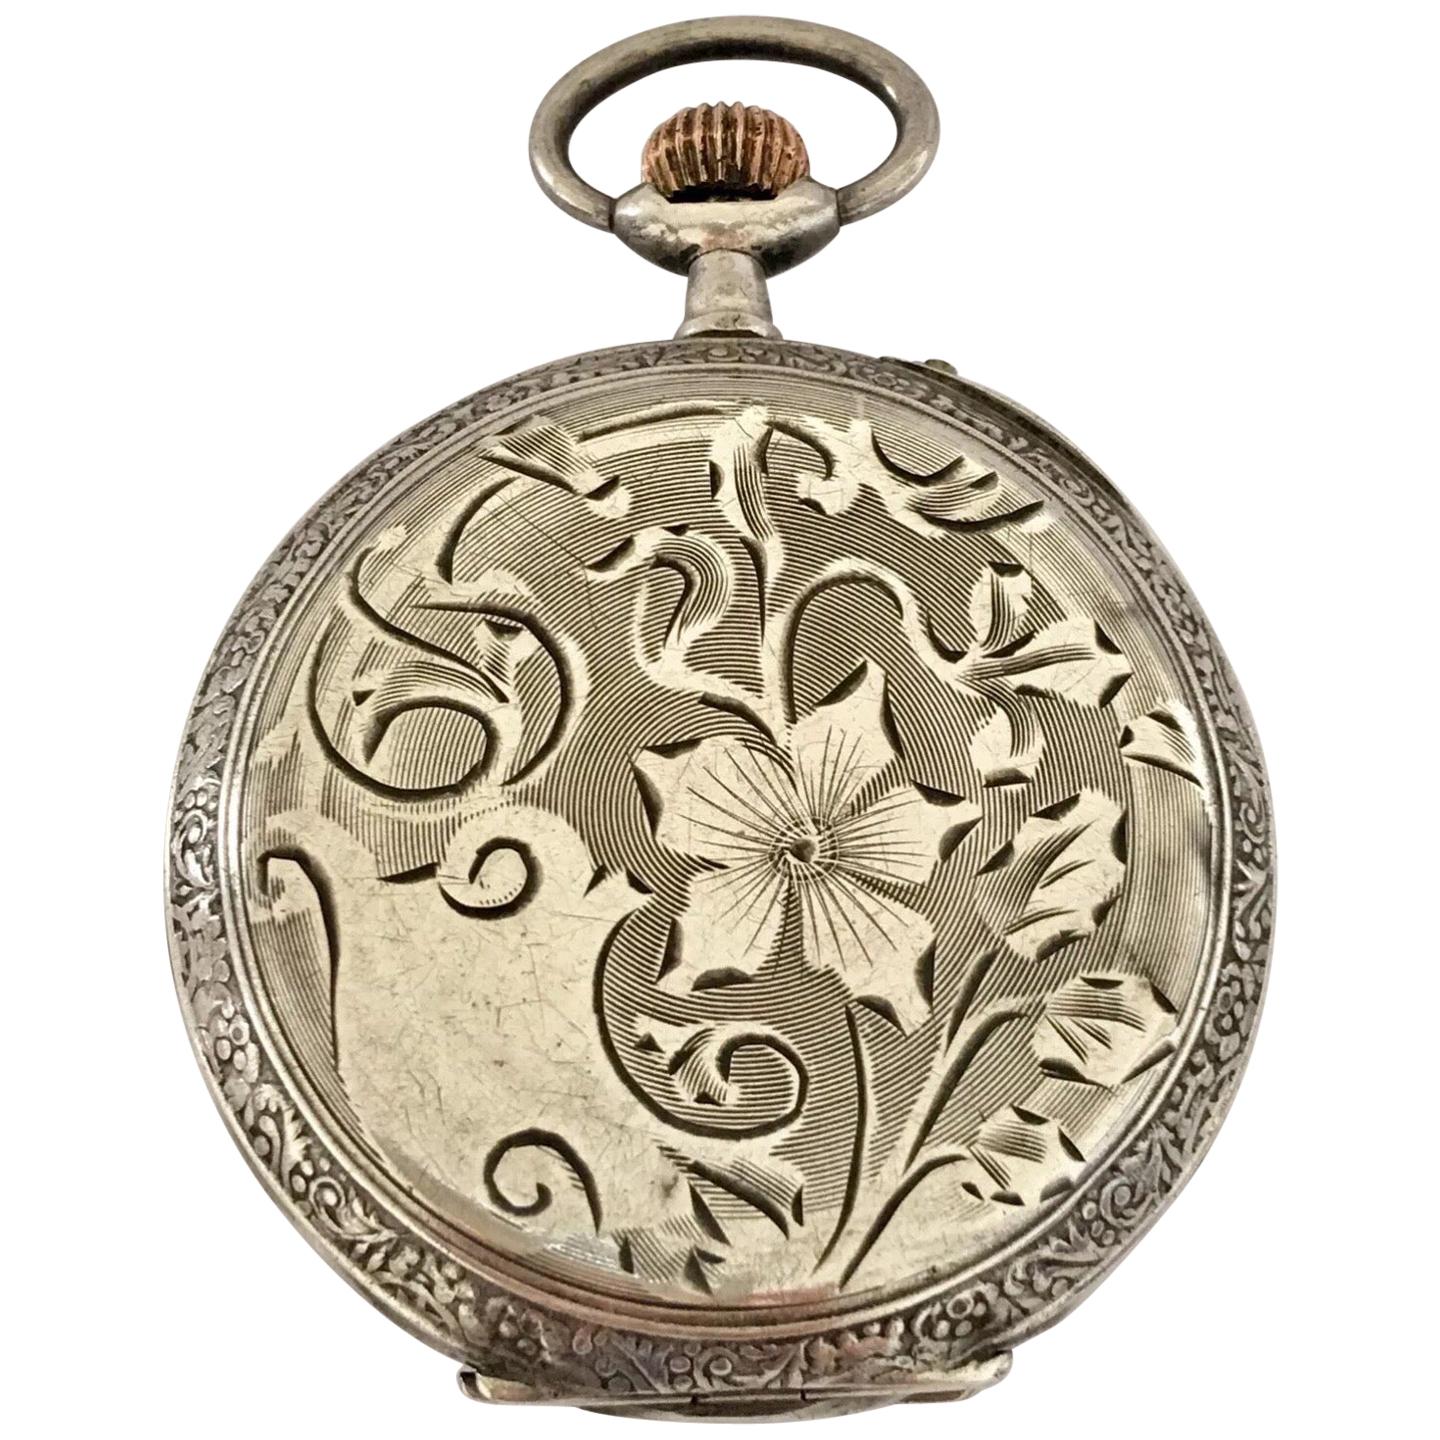 Antique Silver Beautifully Engraved Case Pocket Watch